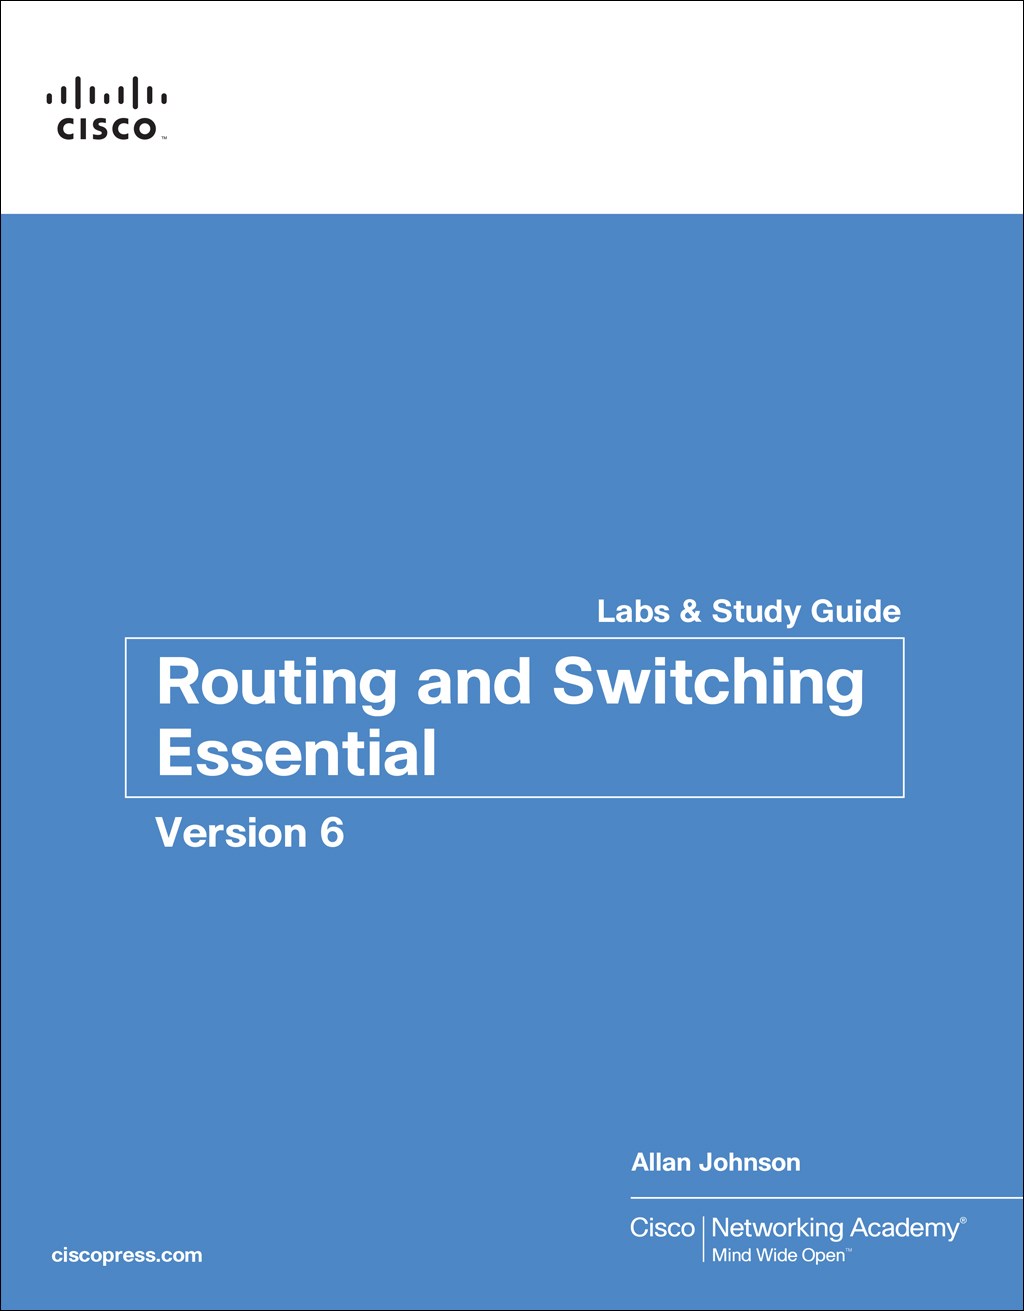 Routing and Switching Essentials v6 Labs & Study Guide